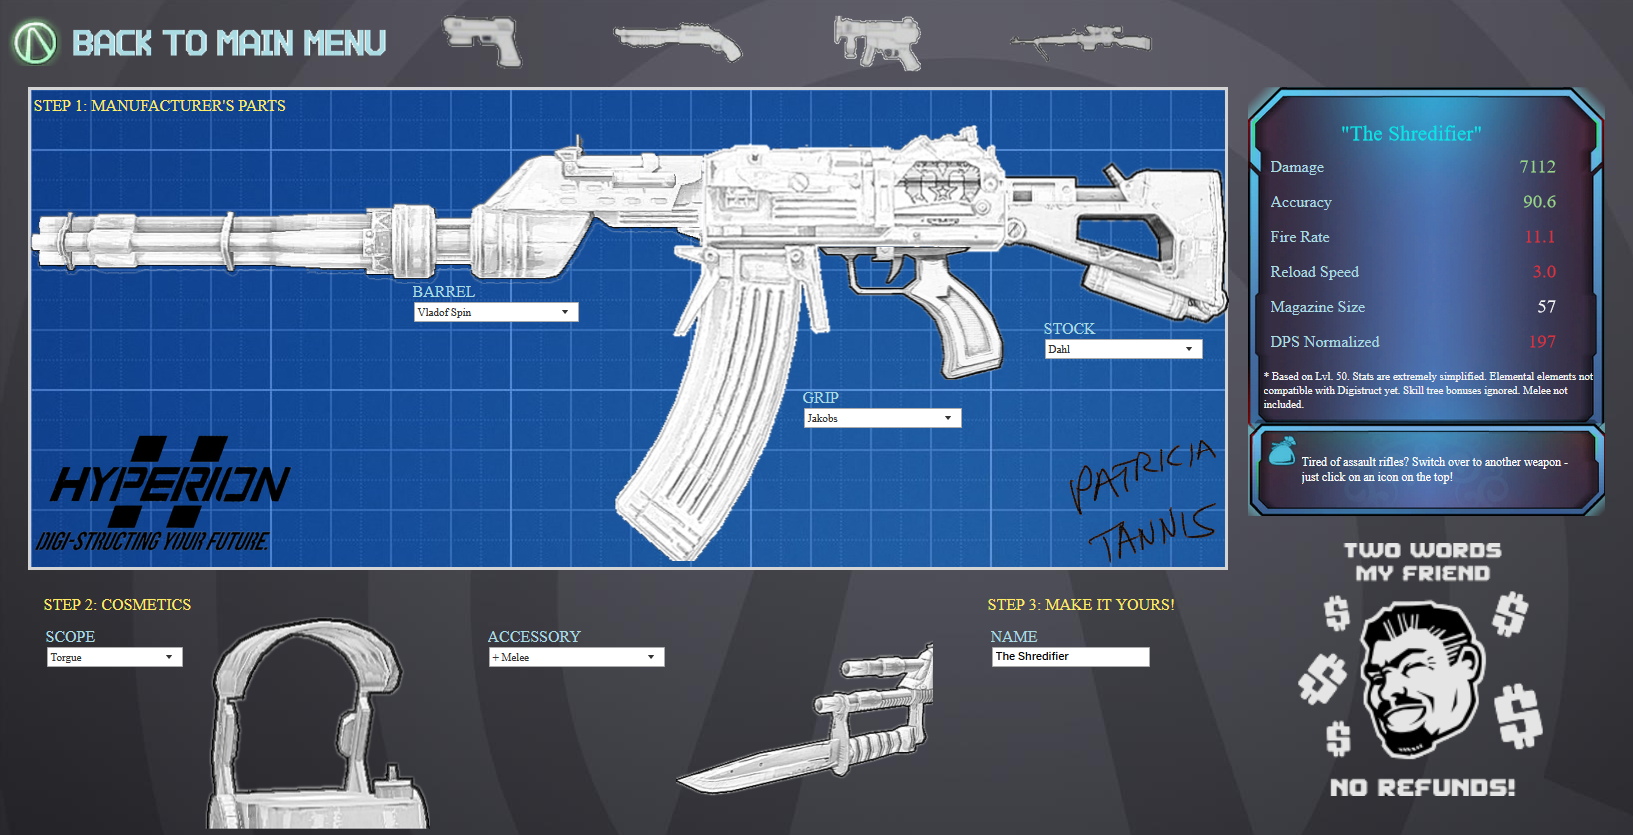 Thumbnail of a Tableau Dashboard - Borderlands Weapons Creator